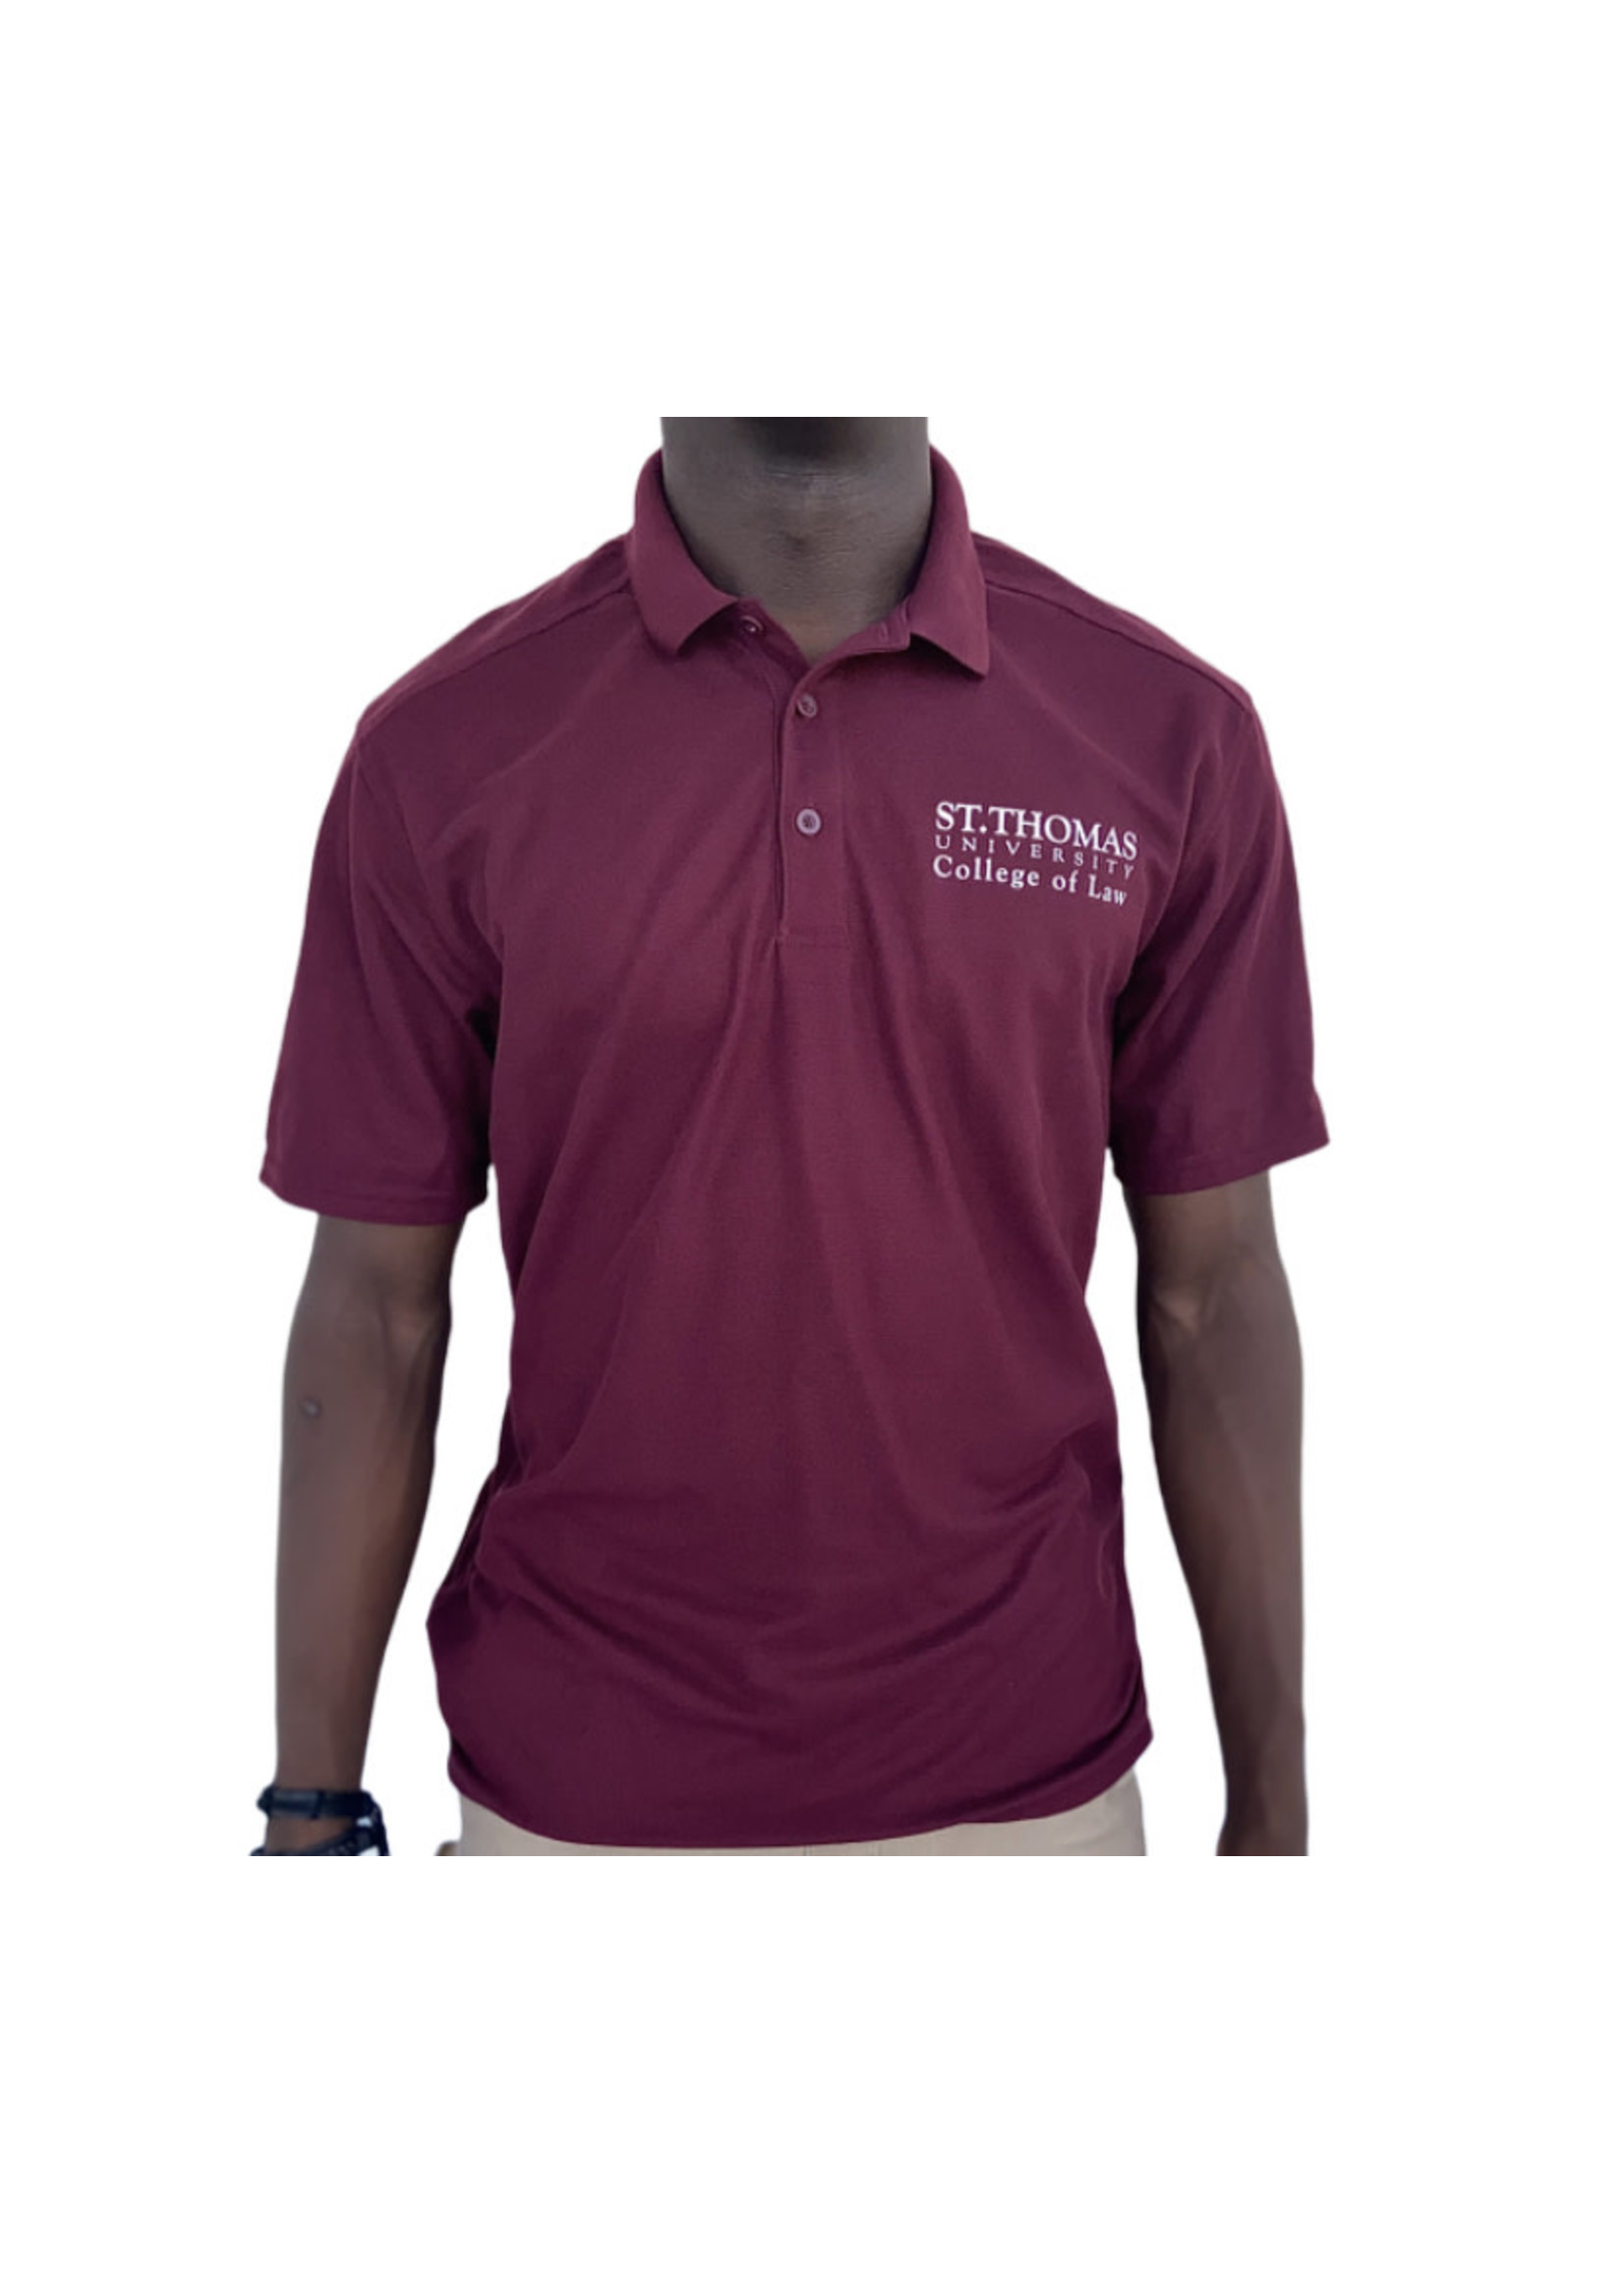 College of Law Polo Burgundy